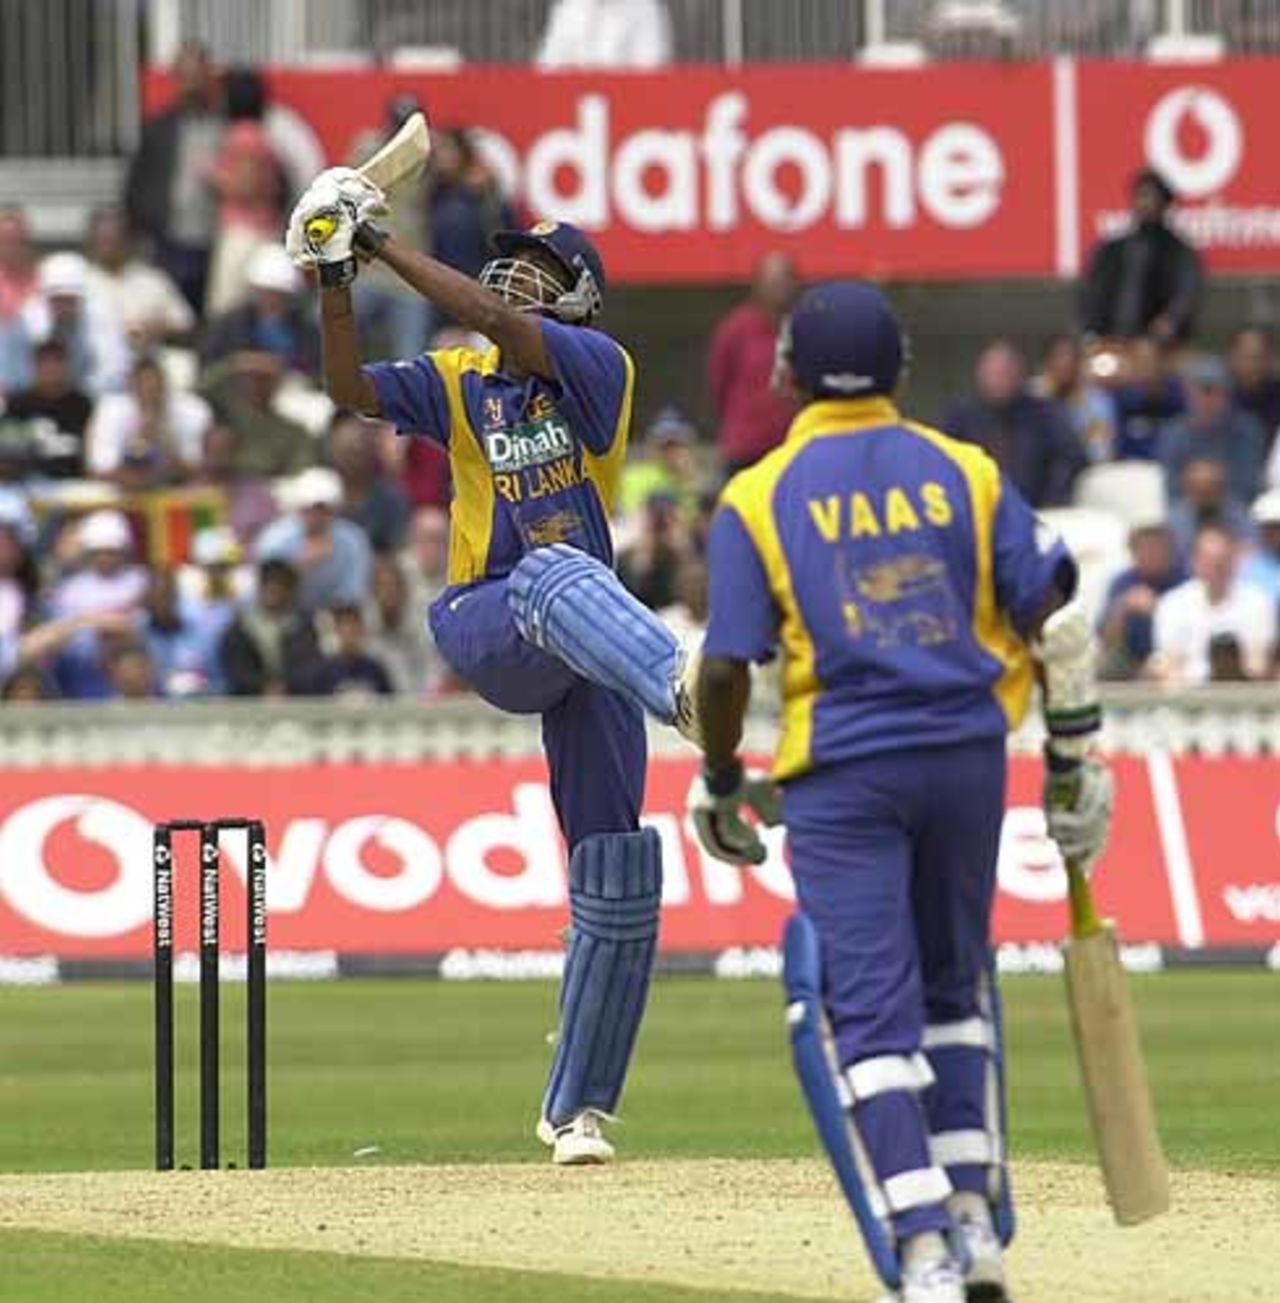 Zoysa lifts Khan to Kaif to be out for 4, India v Sri Lanka, NatWest Series, The Oval, 30 Jun 2002